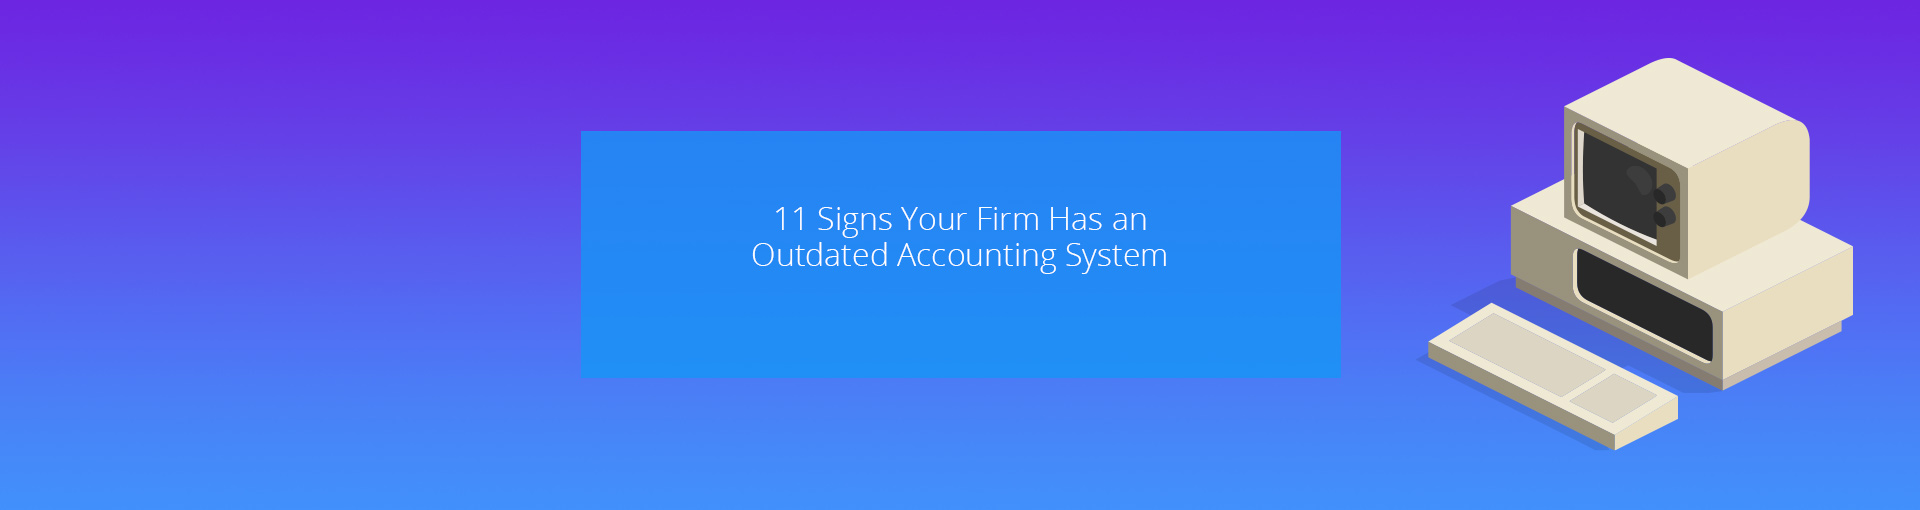 11 Signs Your Firm Has an Outdated Accounting System Featured Image